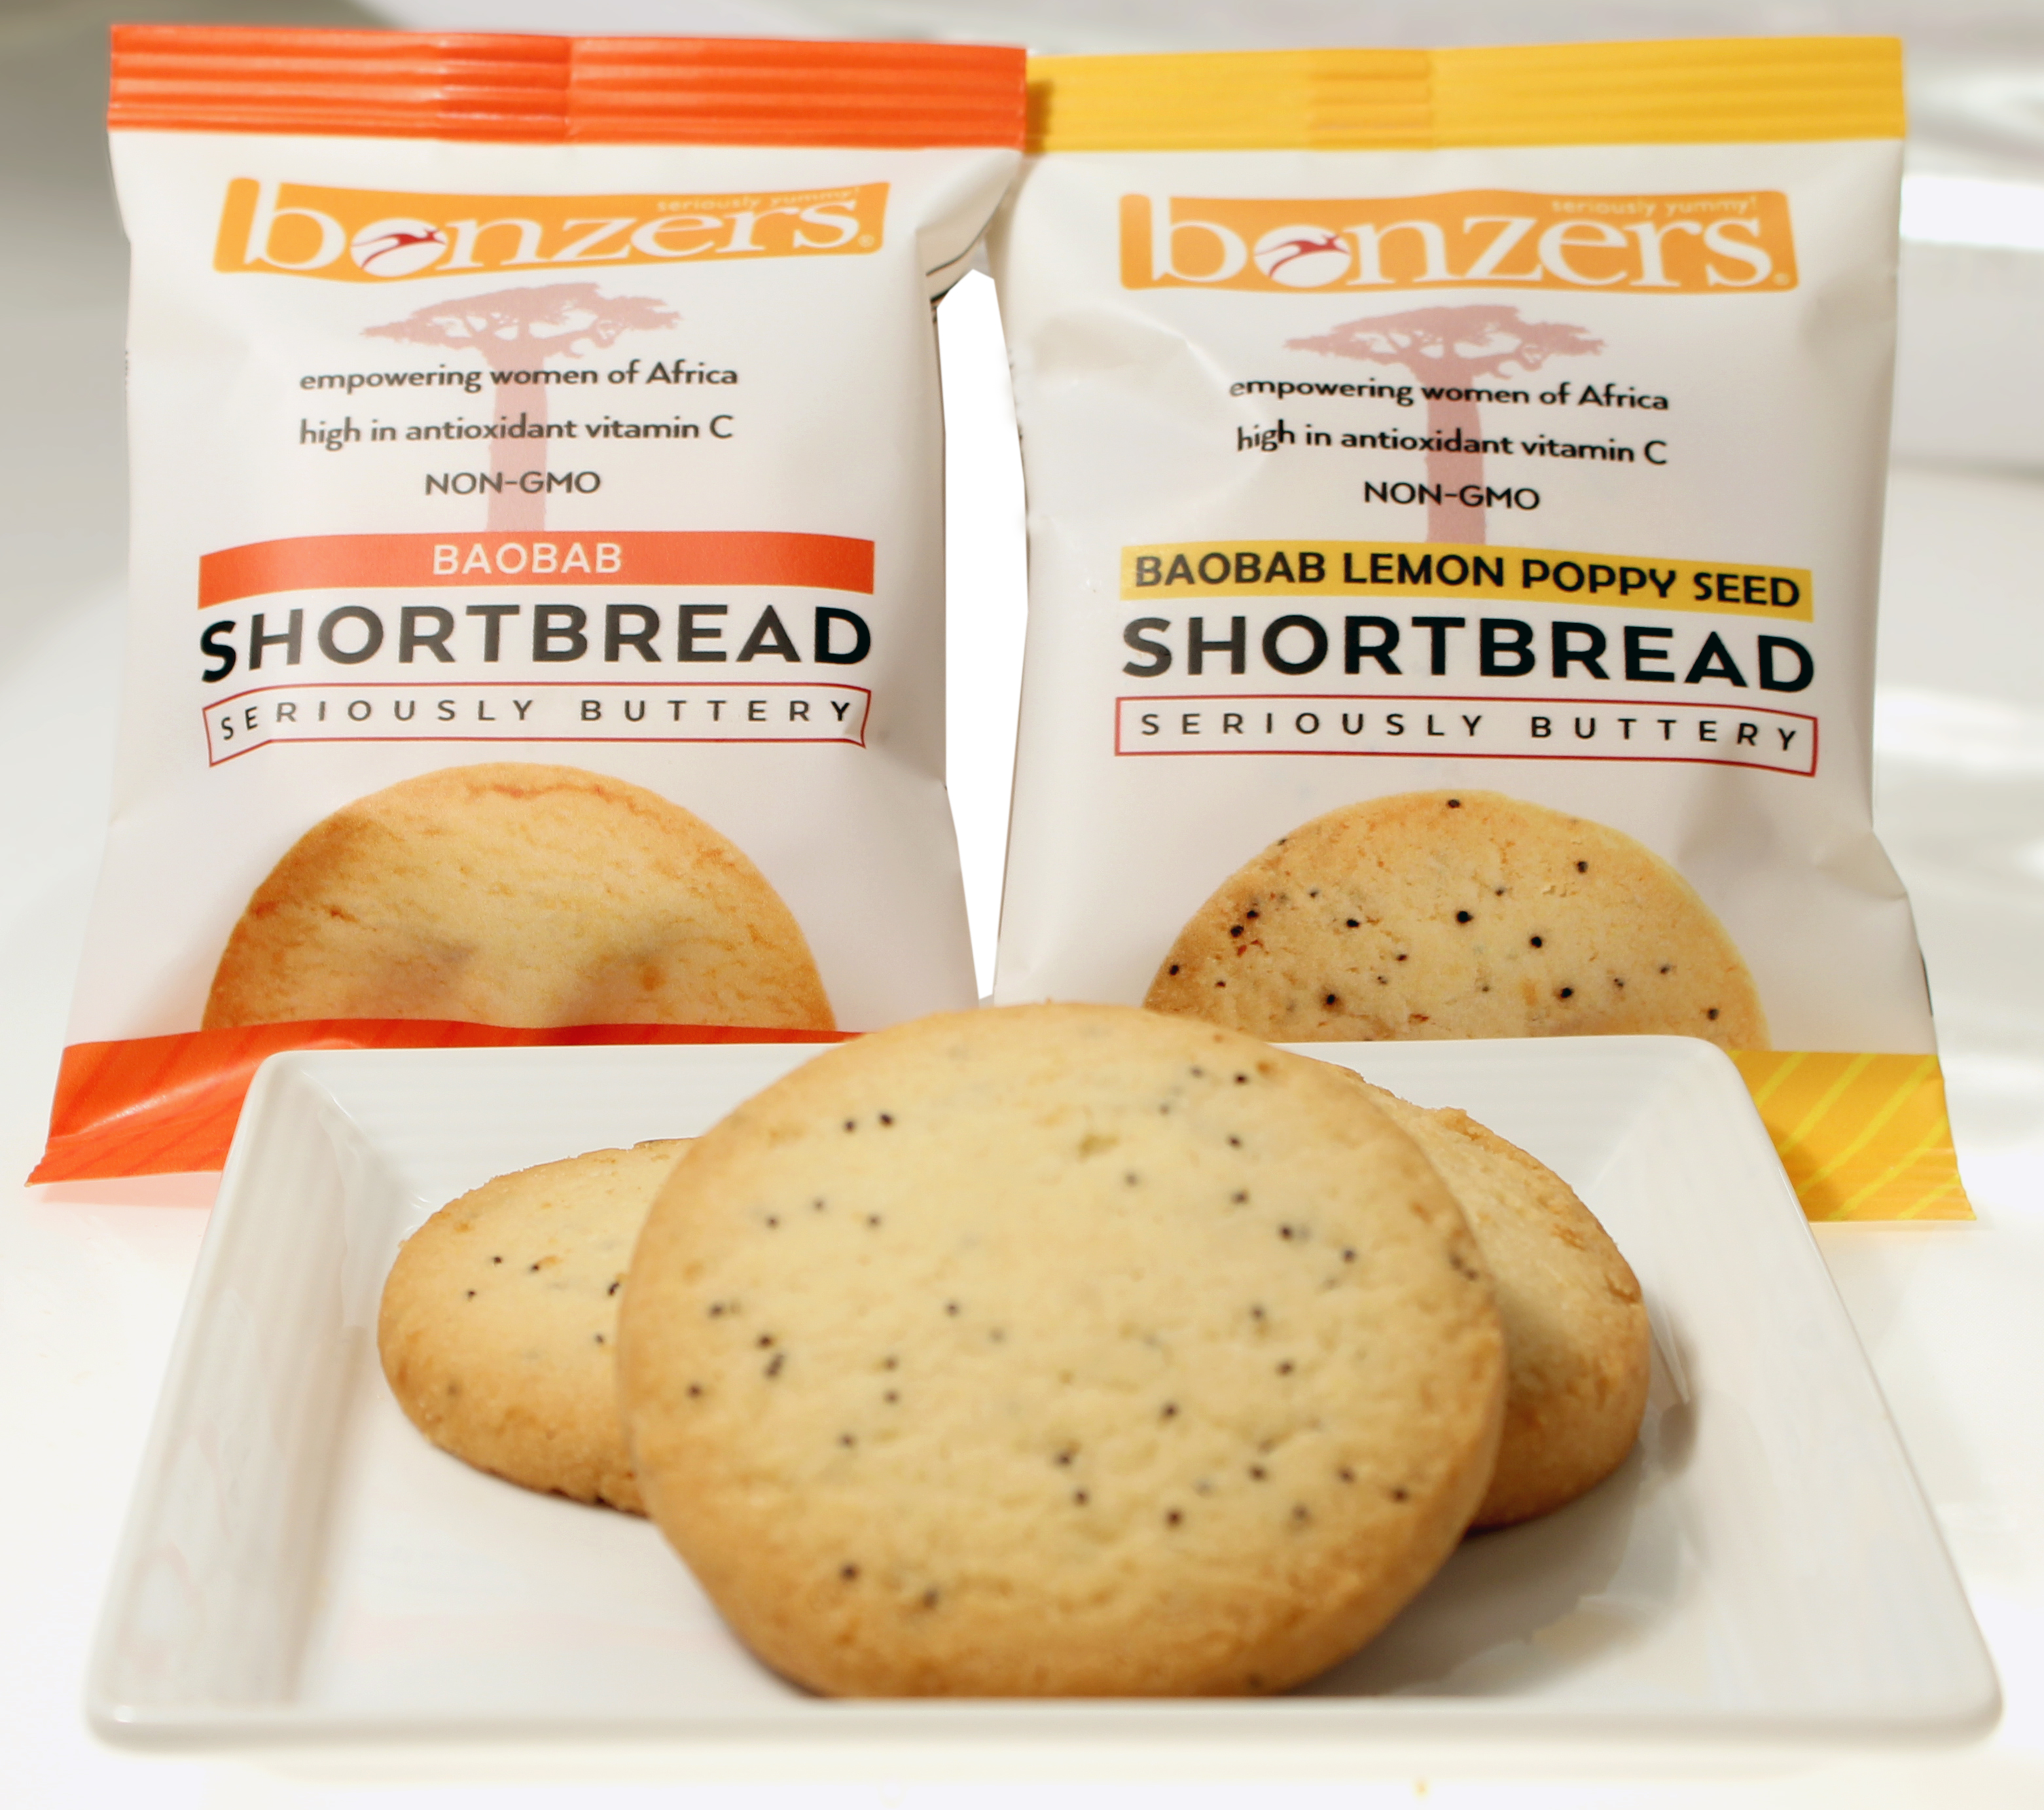 Baobab Shortbread by Michael's Bakery Products, LLC